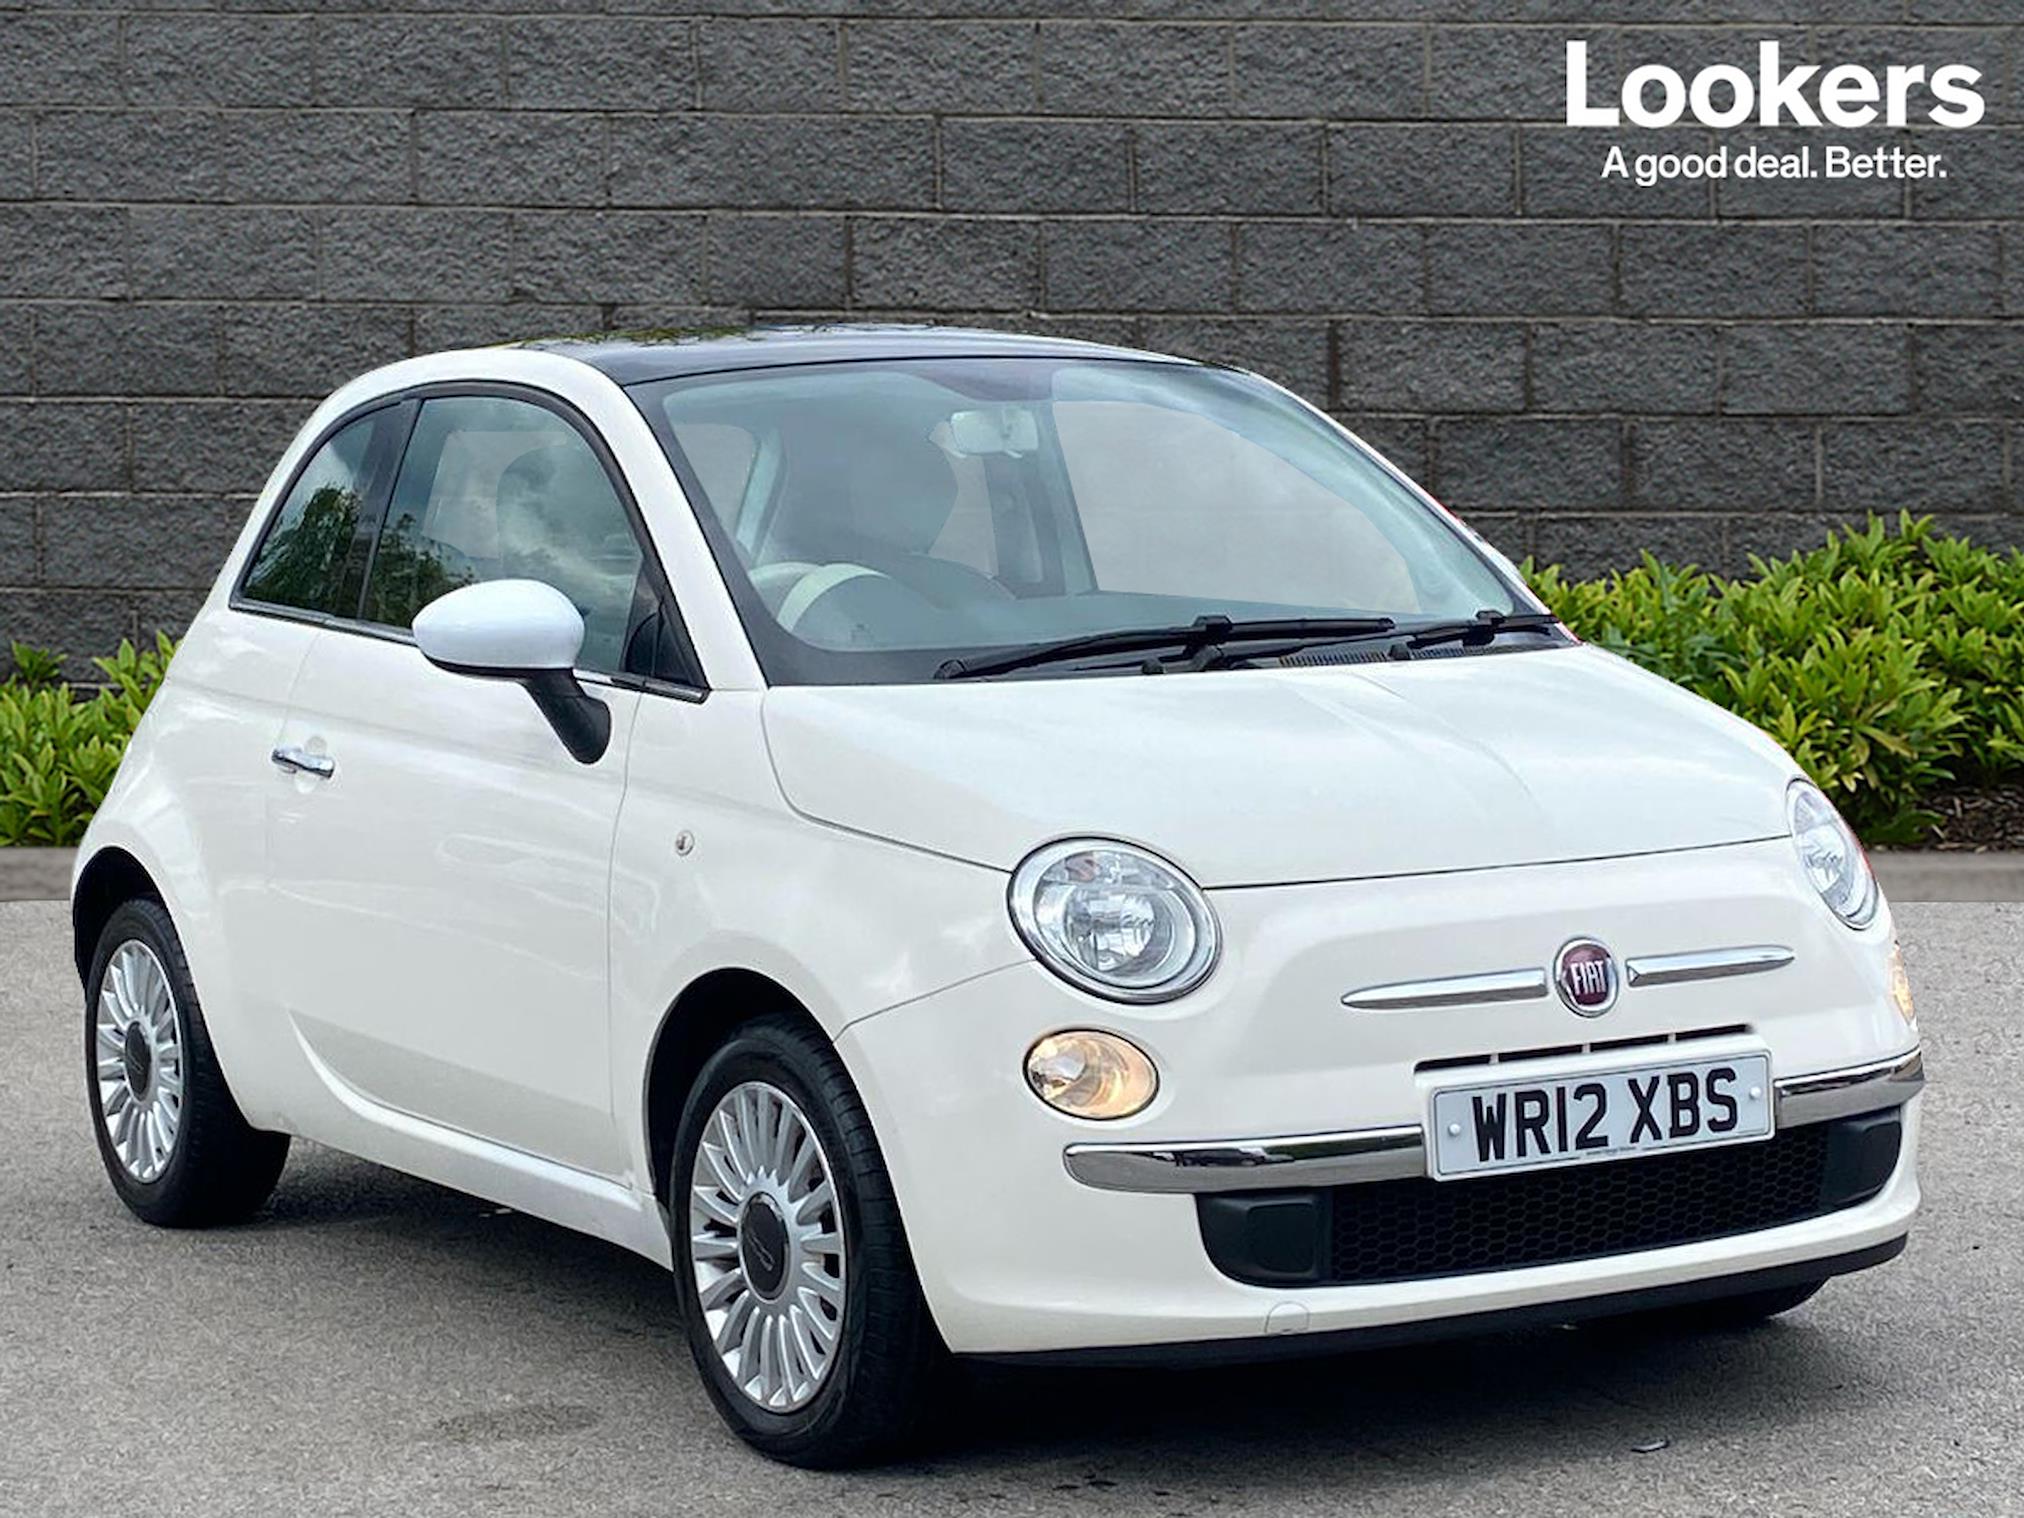 Used FIAT 500 1.2 Lounge 3Dr [Start Stop] 2012